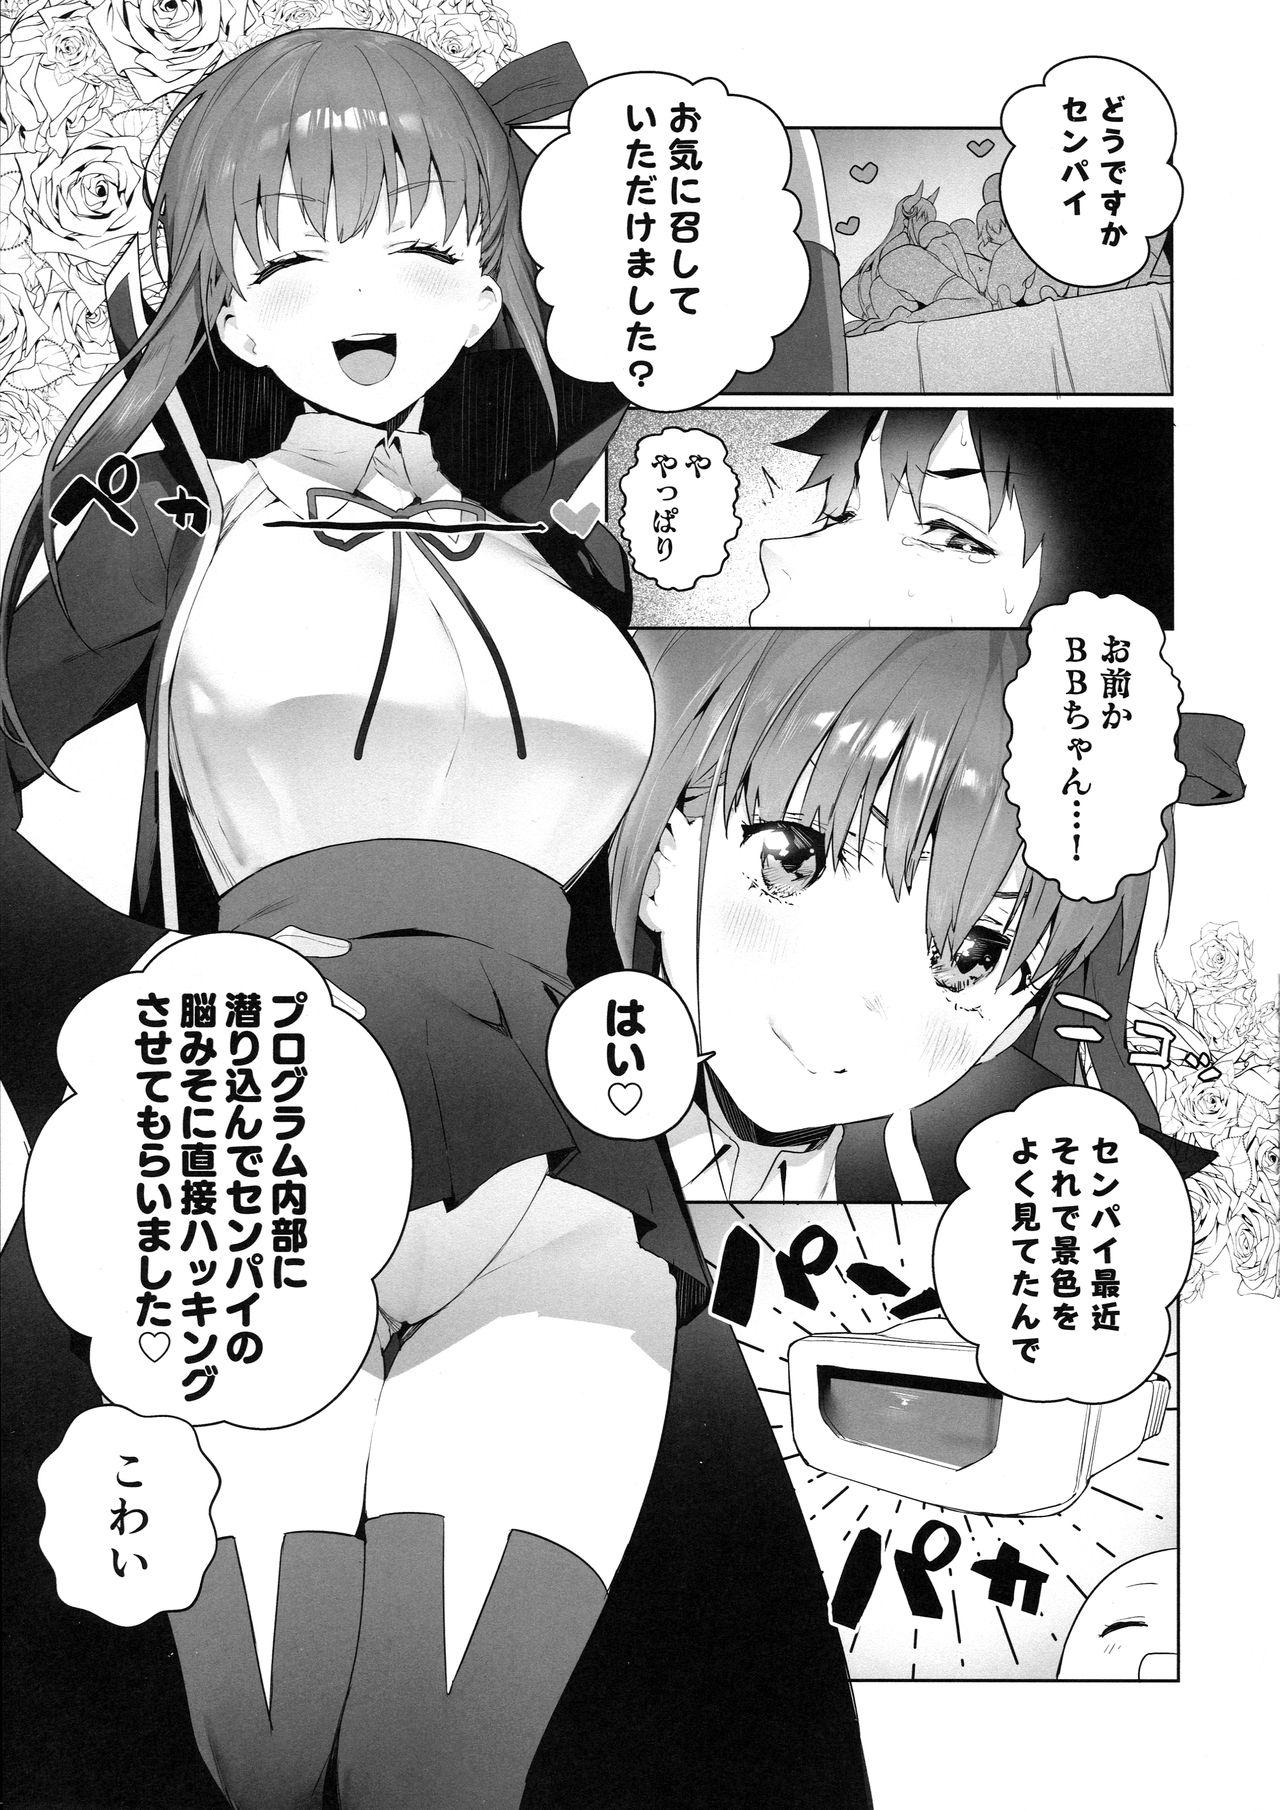 All Natural LOVELESS - Fate grand order Athletic - Page 4